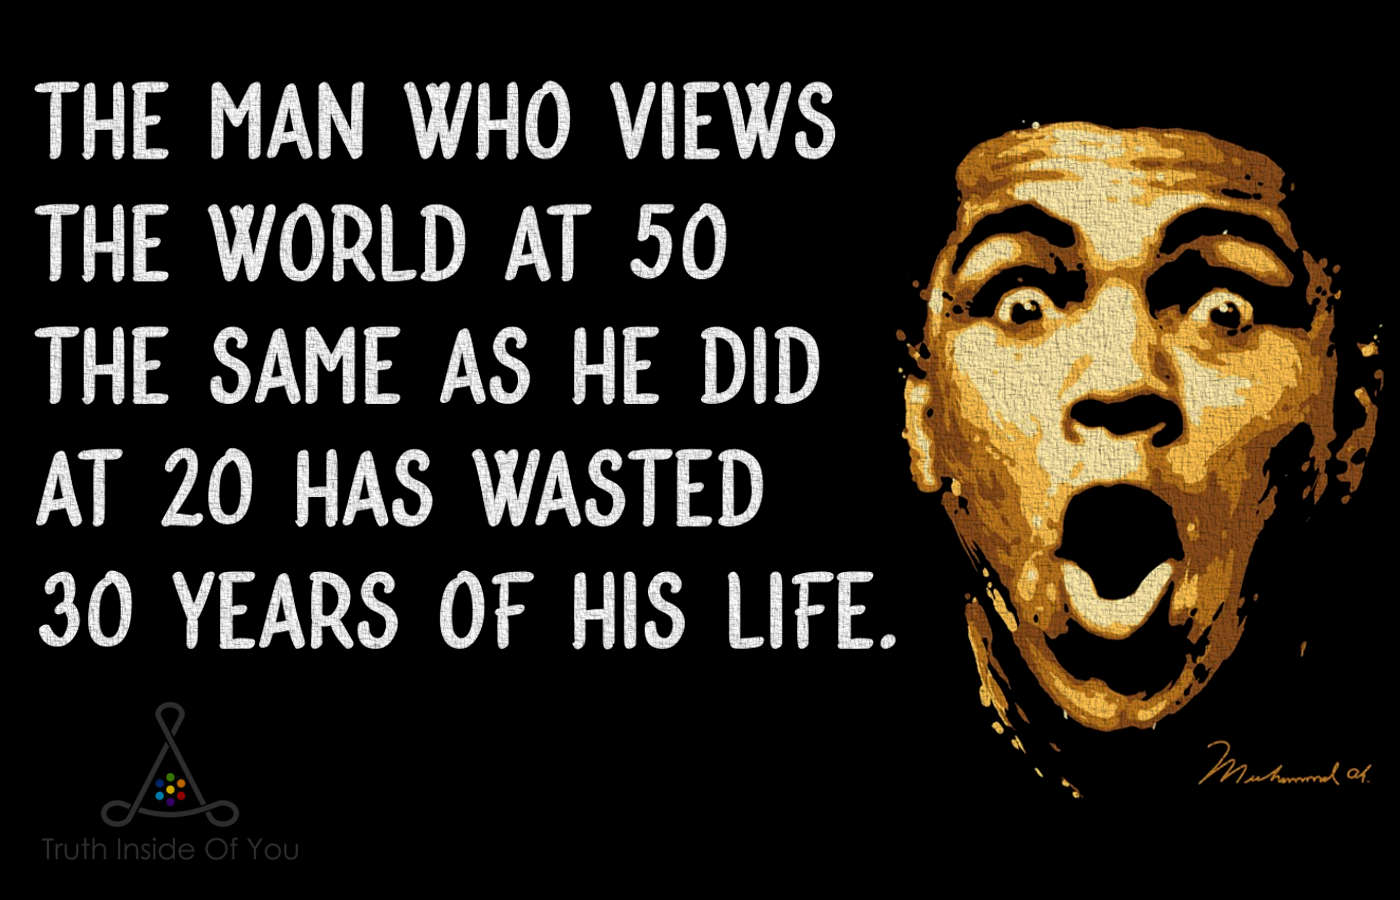 The man who views the world at 50 the same as he did at 20 has wasted 30 years of his life. ~ Muhammad Ali